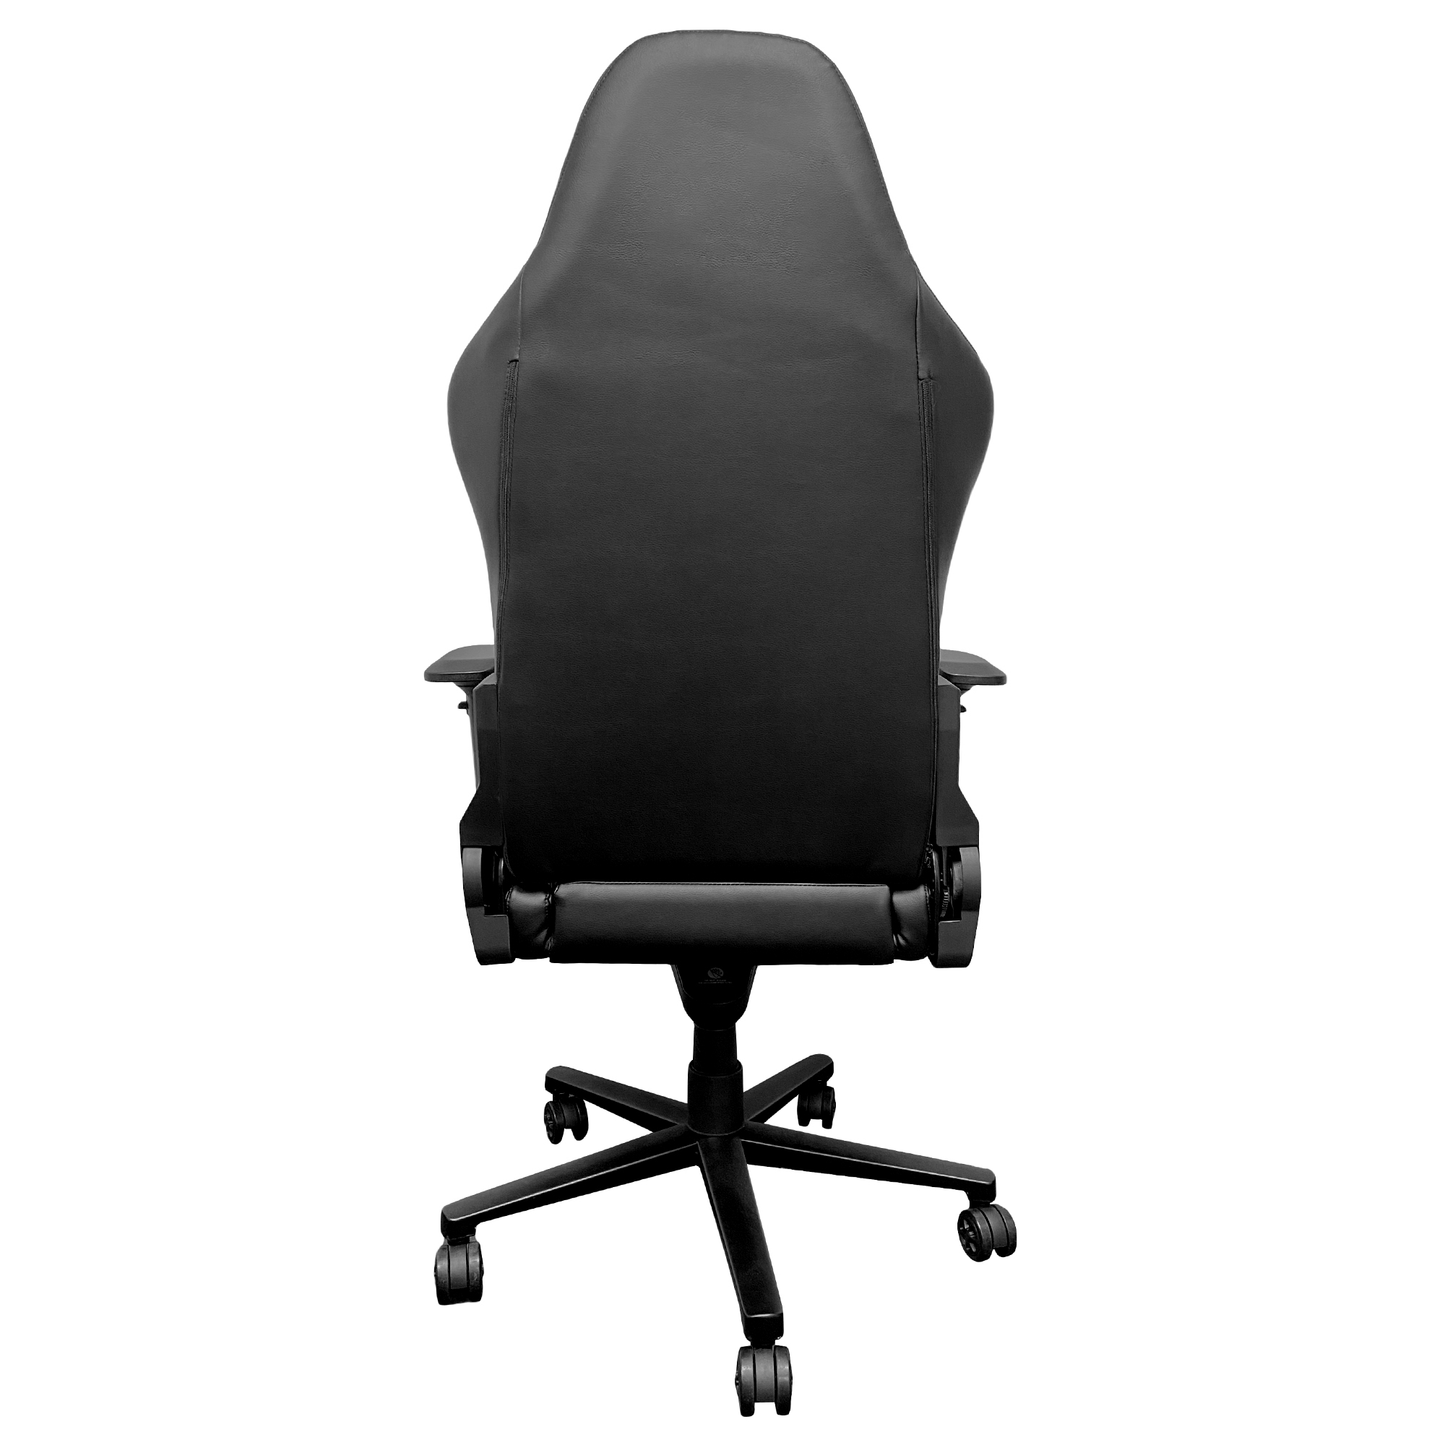 Xpression Pro Gaming Chair with Northern State N Logo